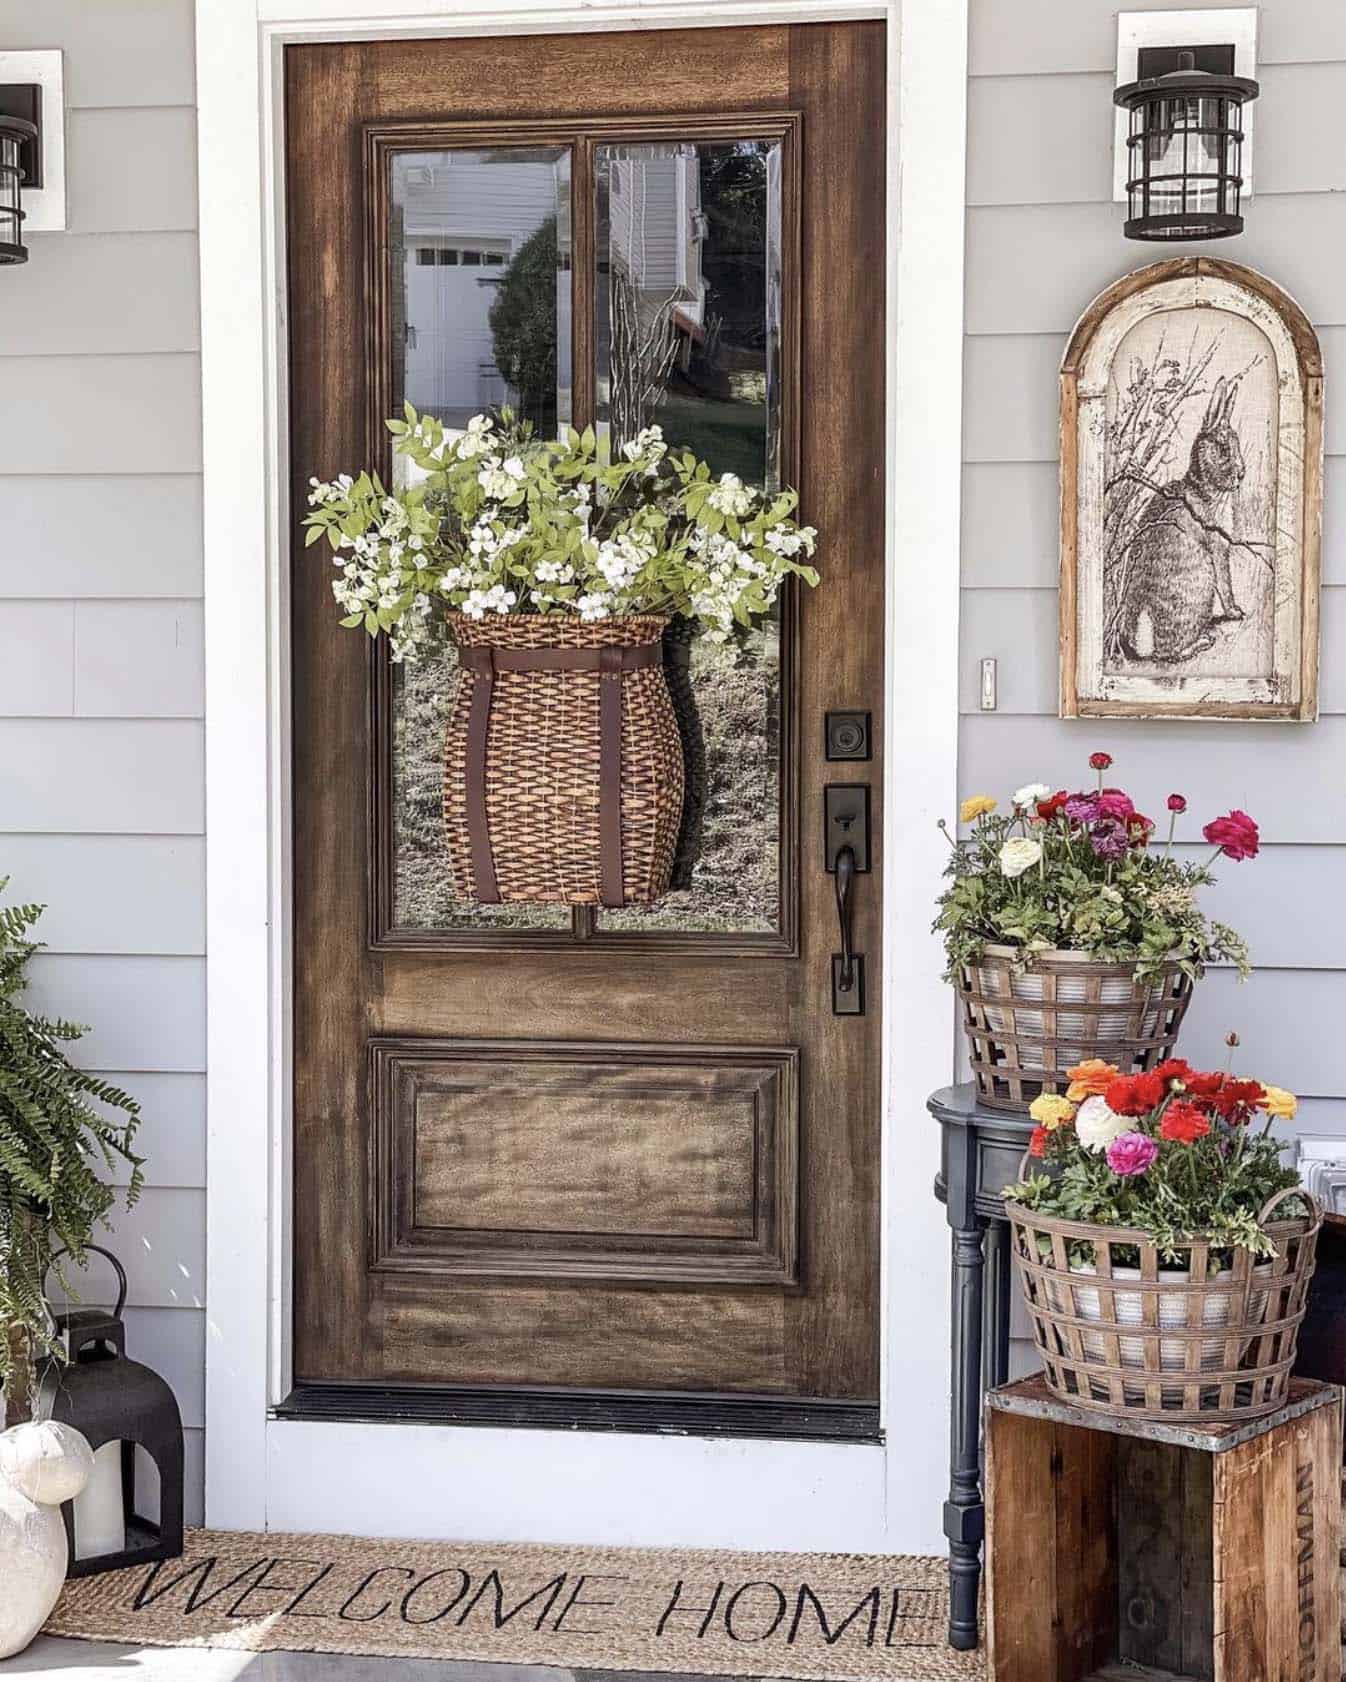 spring decor on the front porch with a hanging basket on the door and bunny artwork on the wall